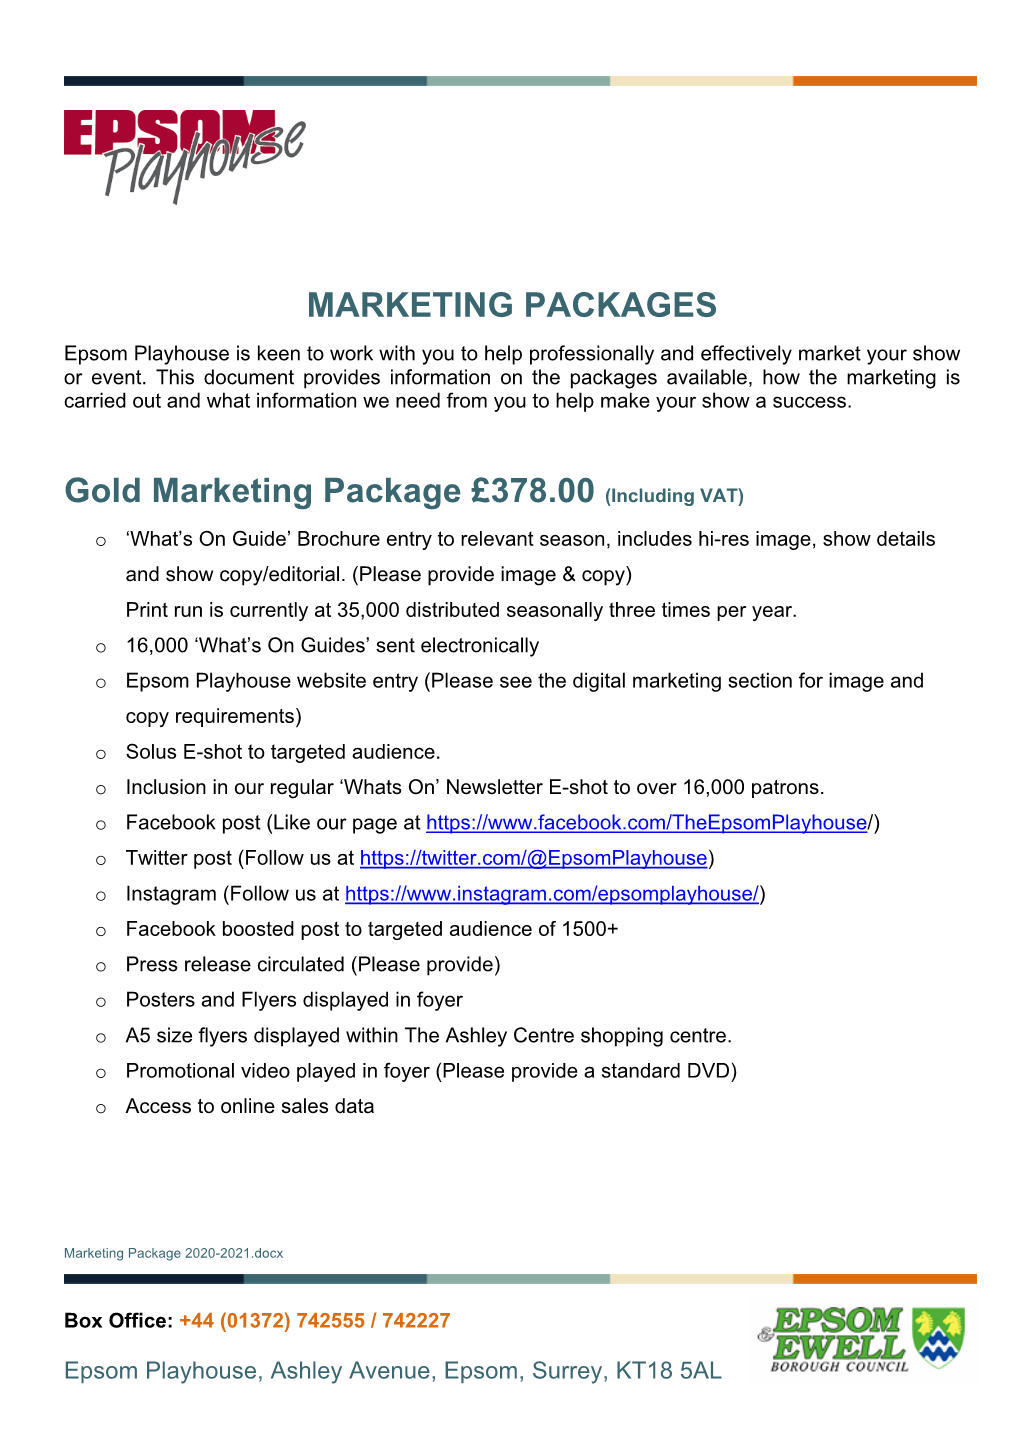 Marketing Package 2020-2021.Docx